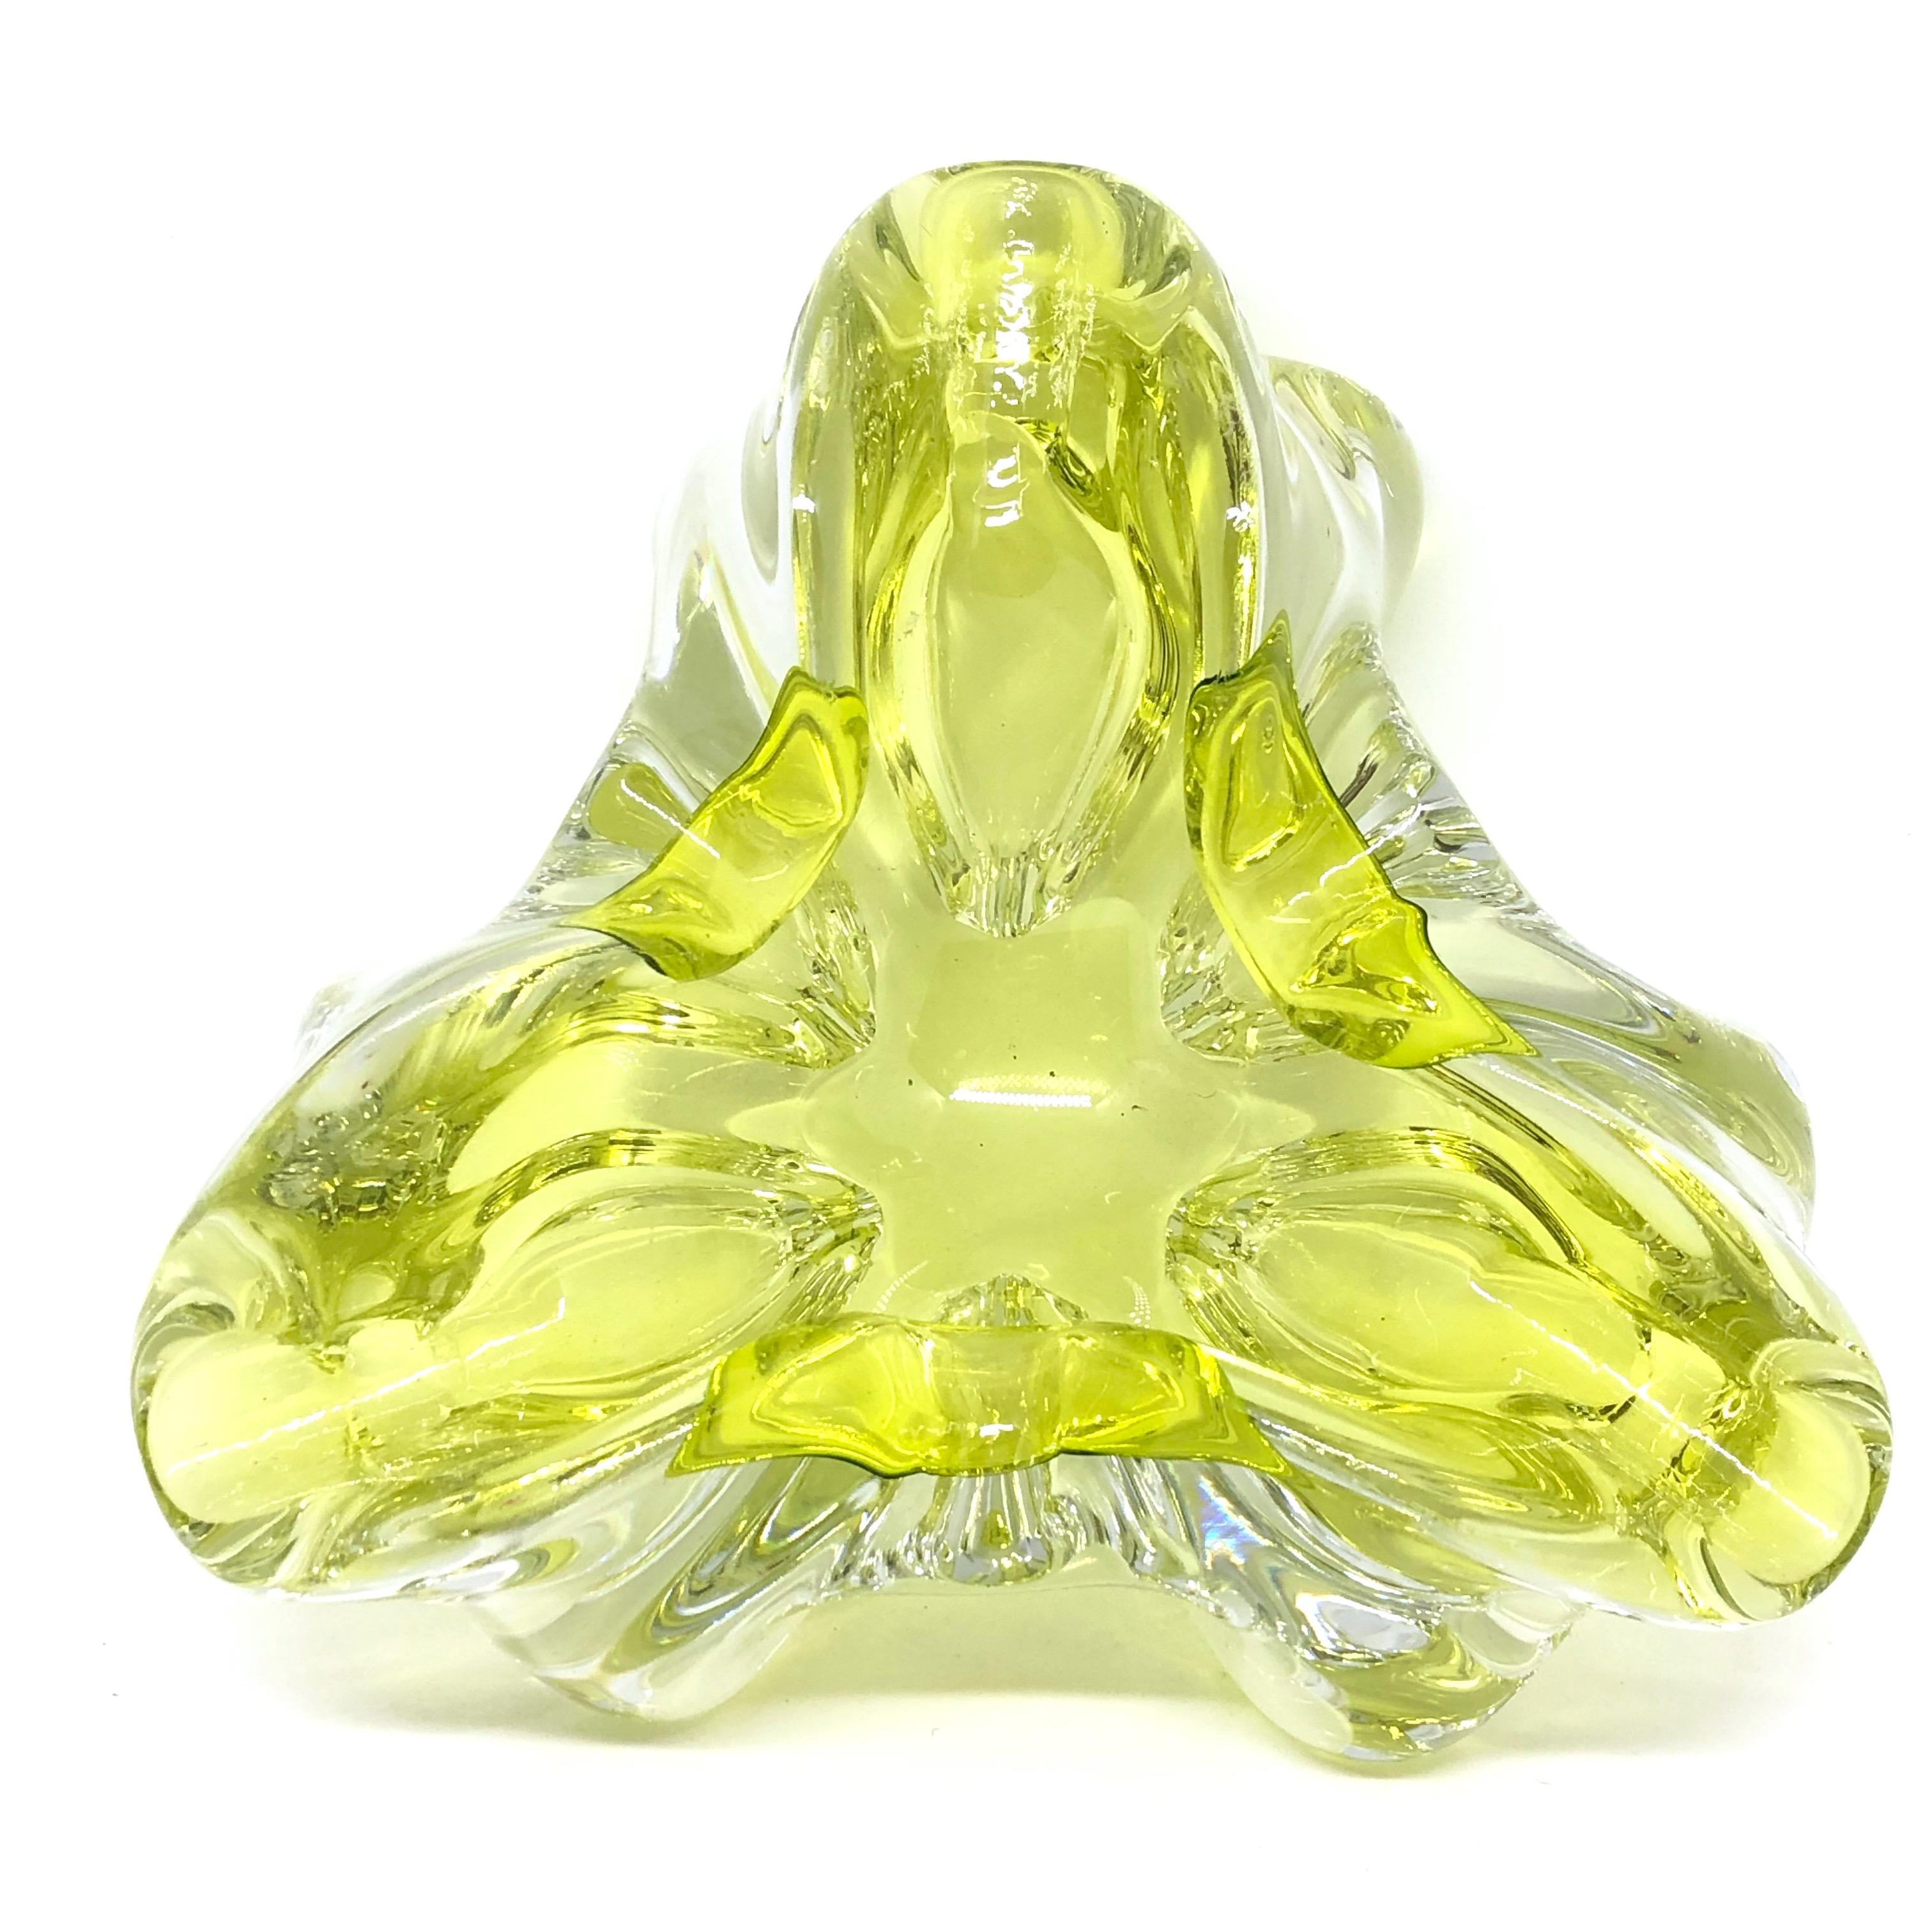 Murano Art Glass Lime Green and Clear Bowl Catchall Italy, Sommerso, 1970s For Sale 1